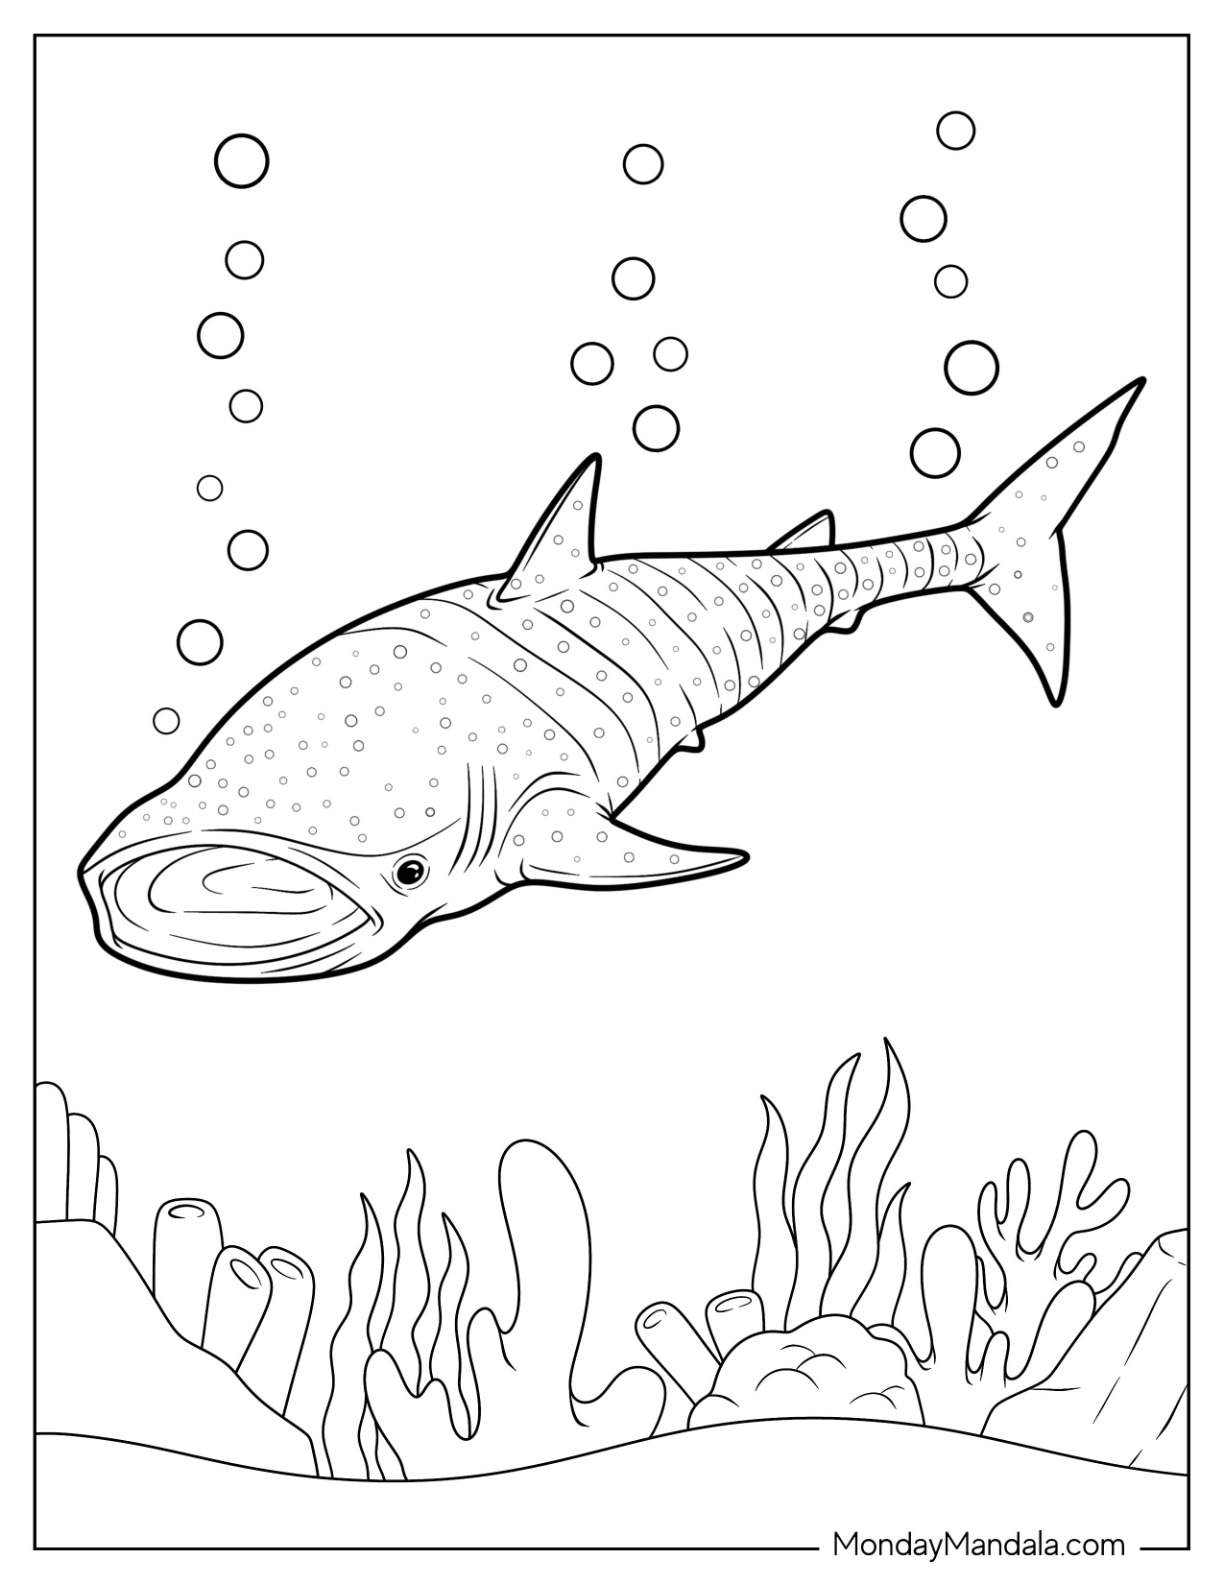 Shark coloring pages free pdf printables